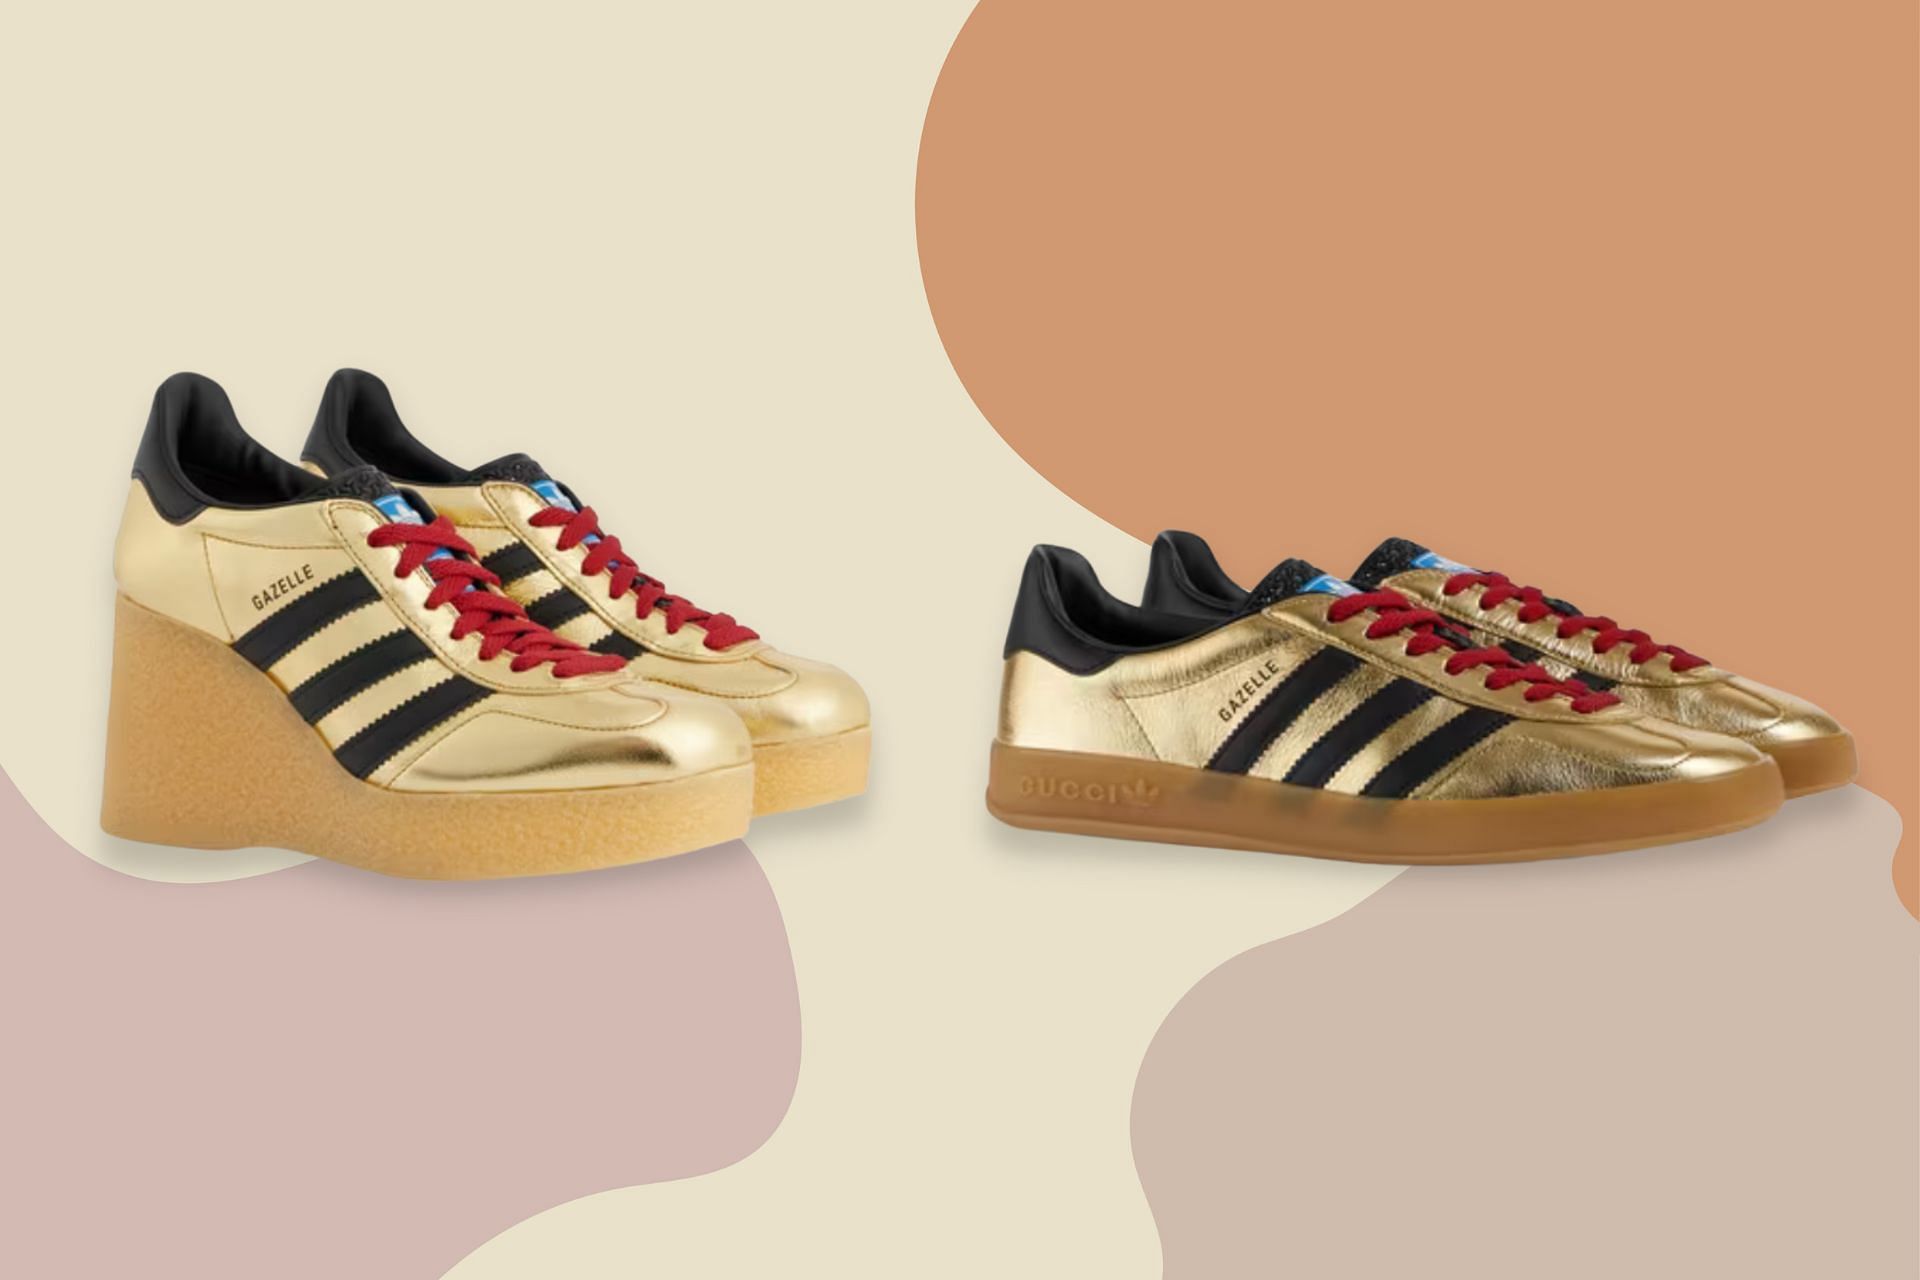 Where to buy Gucci x Adidas Gazelle colorways? Price, release and more explored